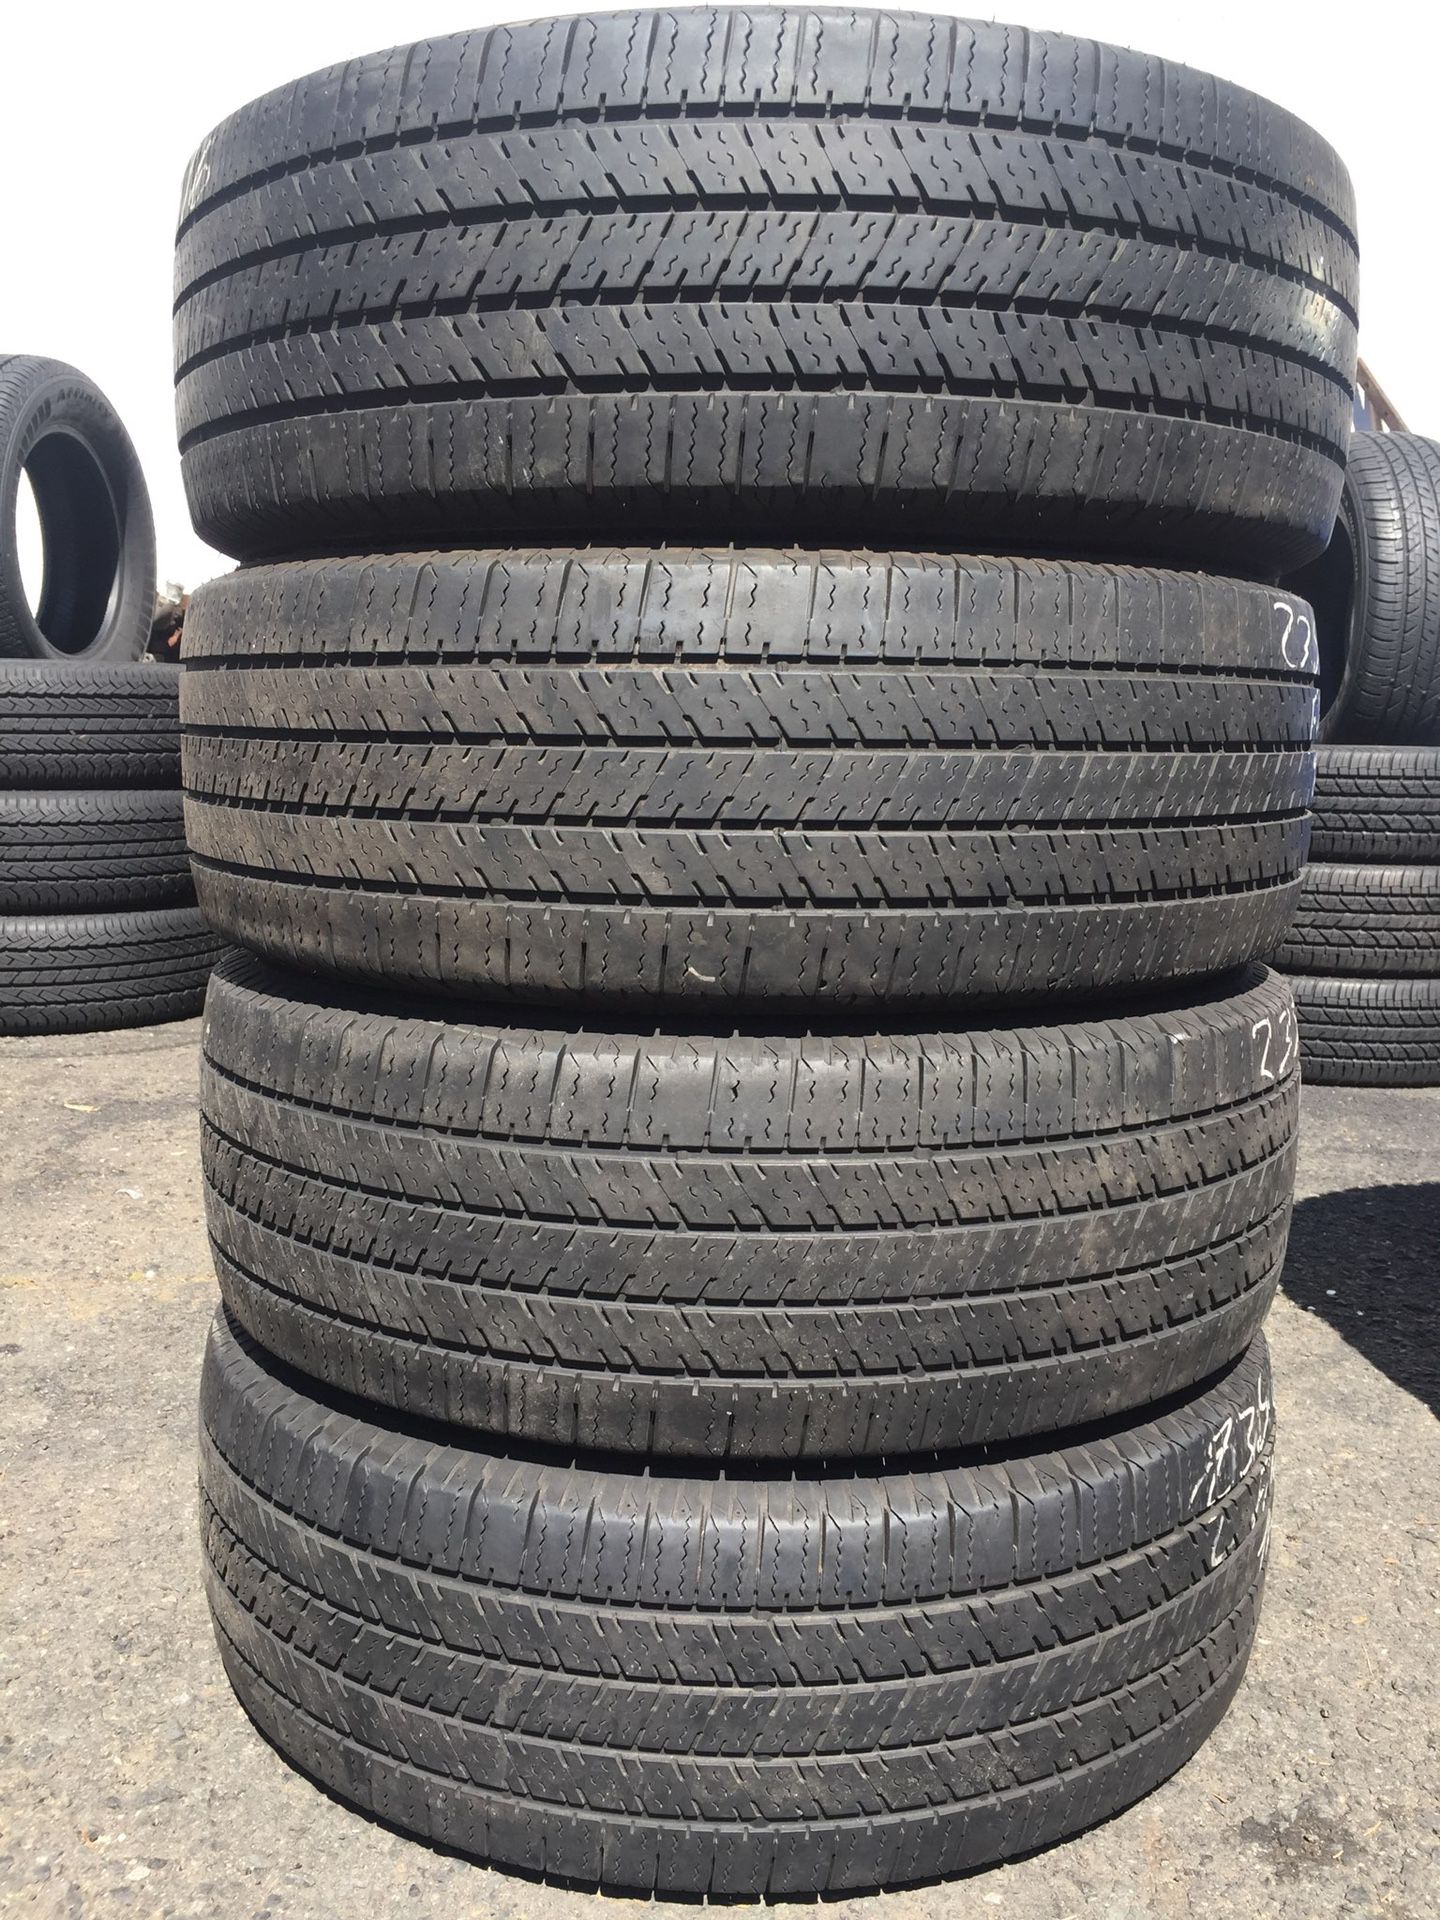 235/65/16 C Firestone set of used tires in great condition 65% tread 185$ for 4 . Installation balance and alignment available. Road force balance a